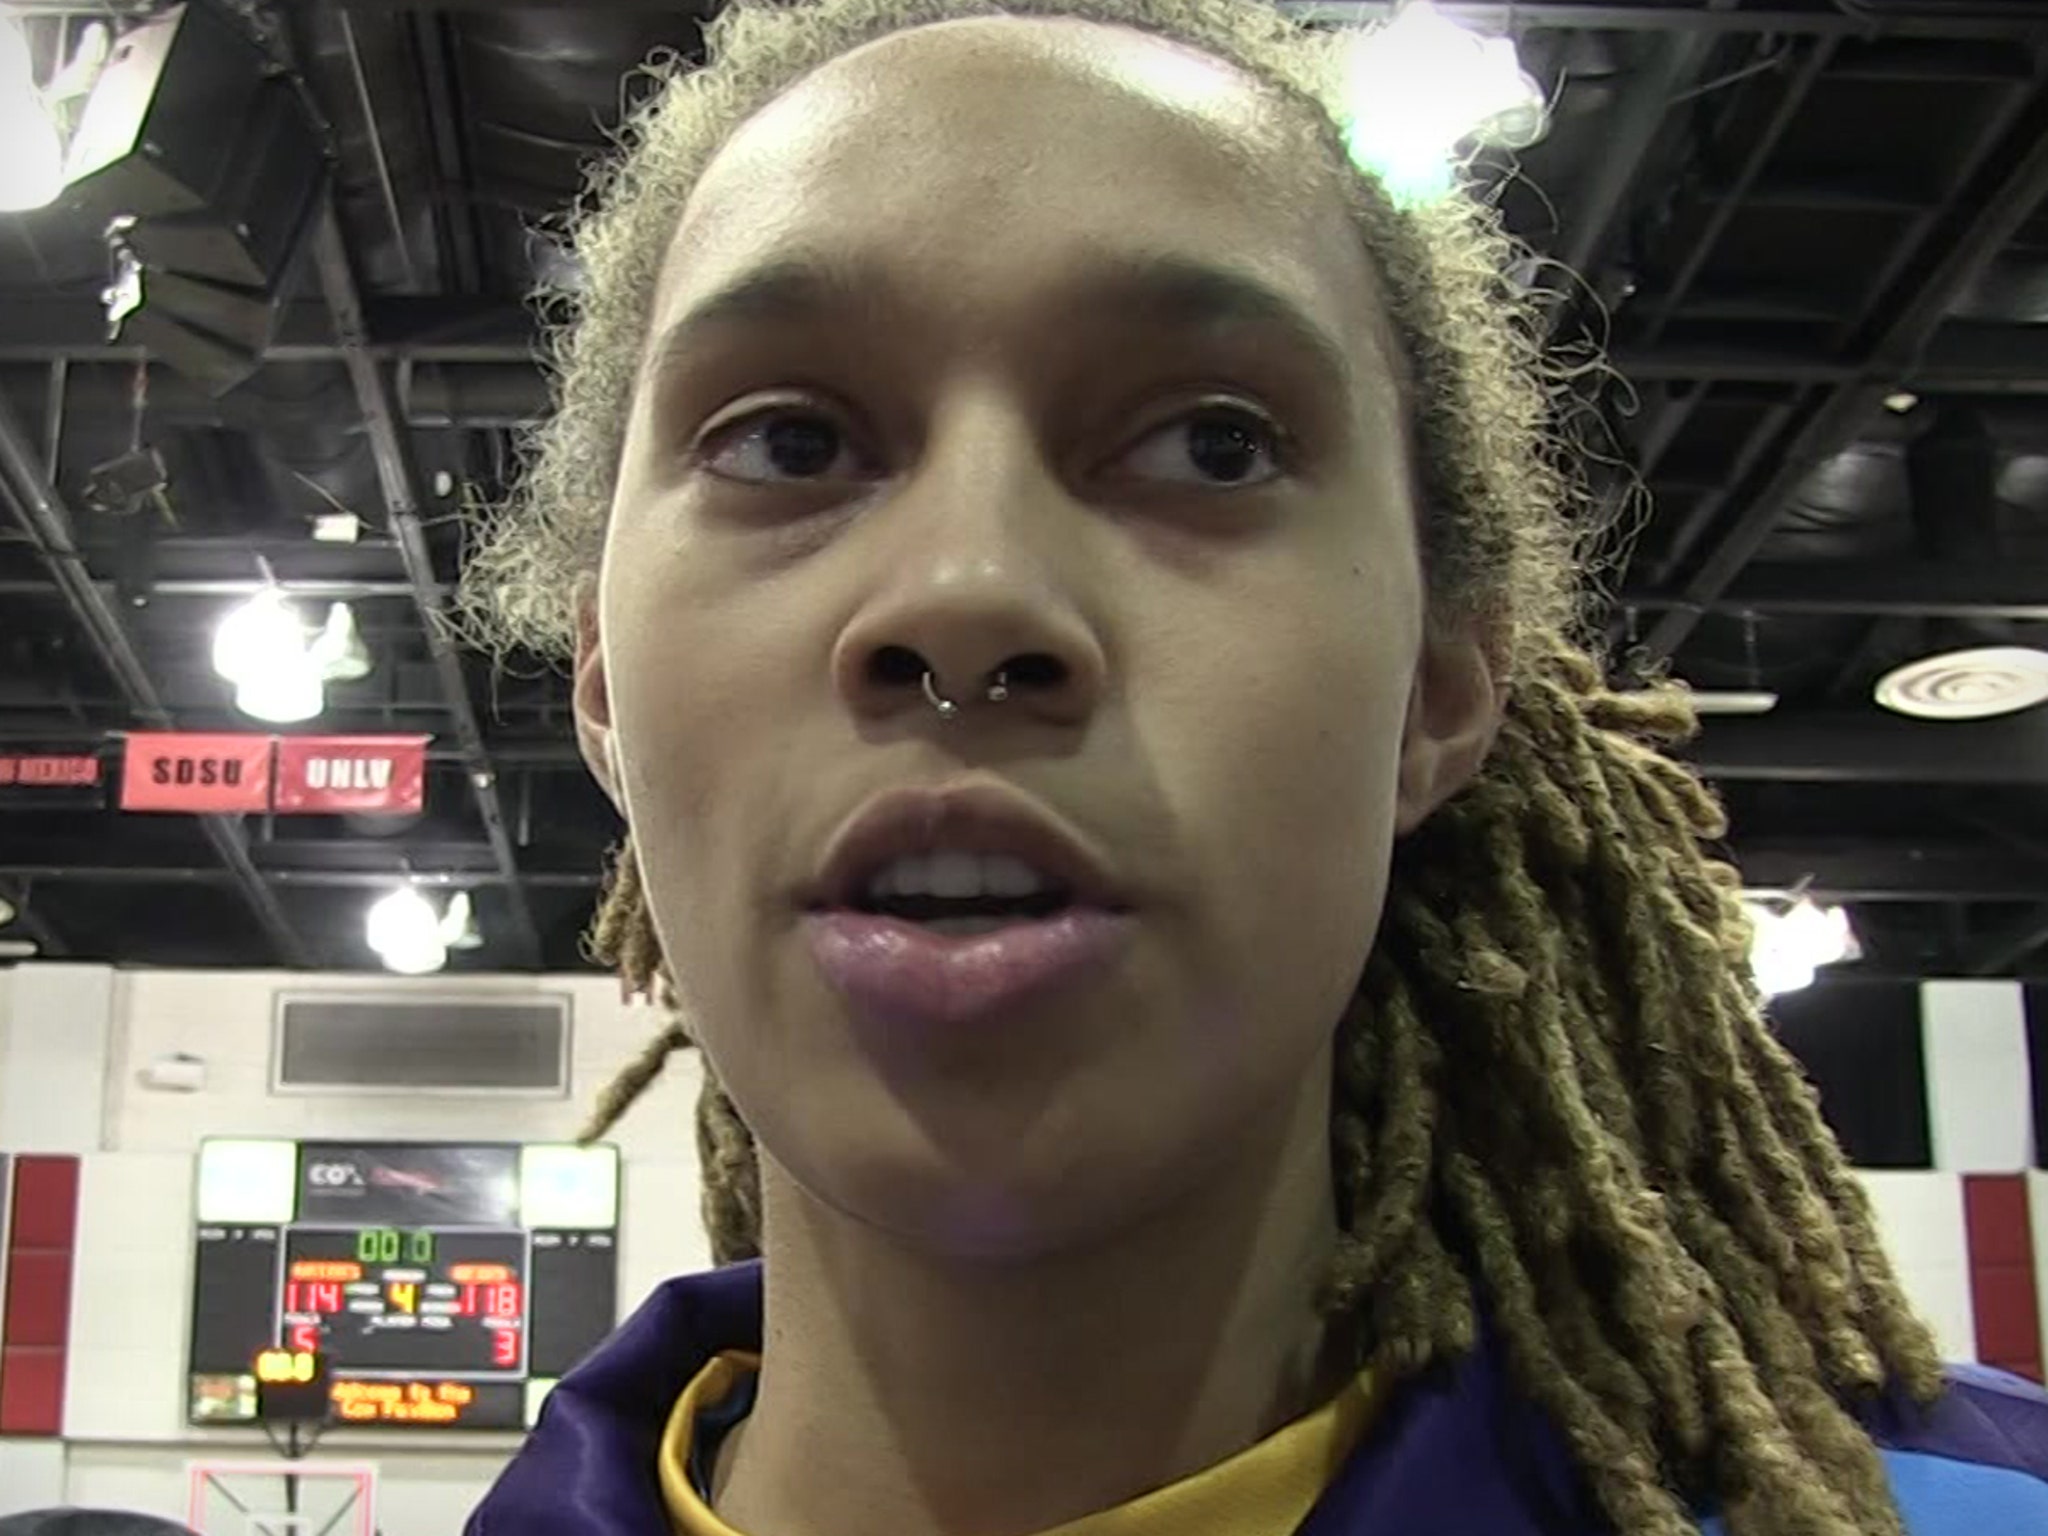 Wnba Star Brittney Griner Reportedly Detained In Russia On Drug Charge Could Face 10 Yrs